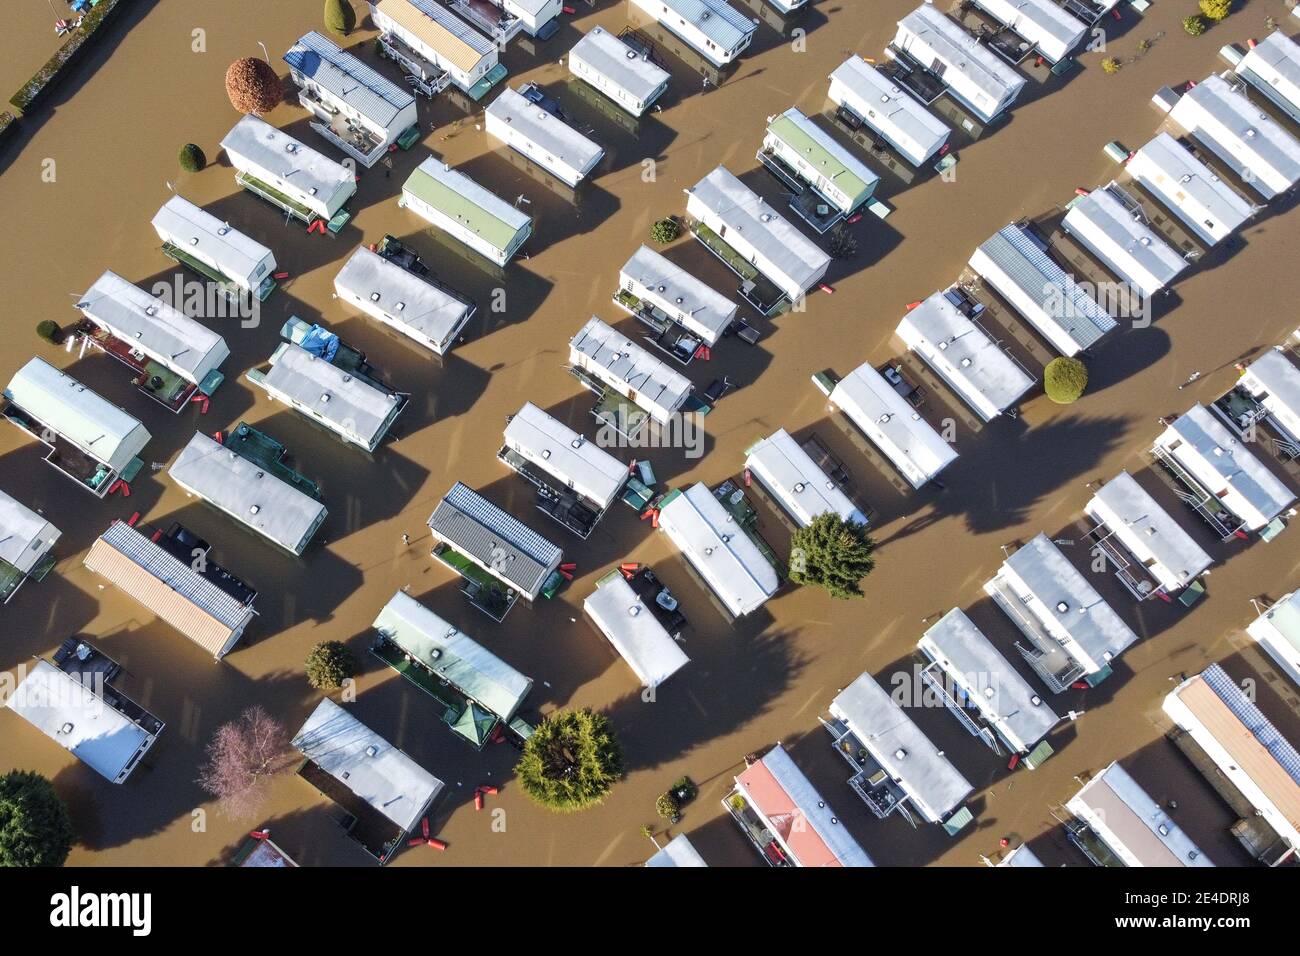 Stourport on Severn, UK. 23rd Jan, 2021. Flooding hit parts of Stourport on Severn today as the River Severn burst its banks from continued rain brought by Storm Christoph. The Treasure Island fairground was swamped in the flooding as was Redstone Riverside Caravan Park. Pic by Credit: Sam Holiday/Alamy Live News Stock Photo